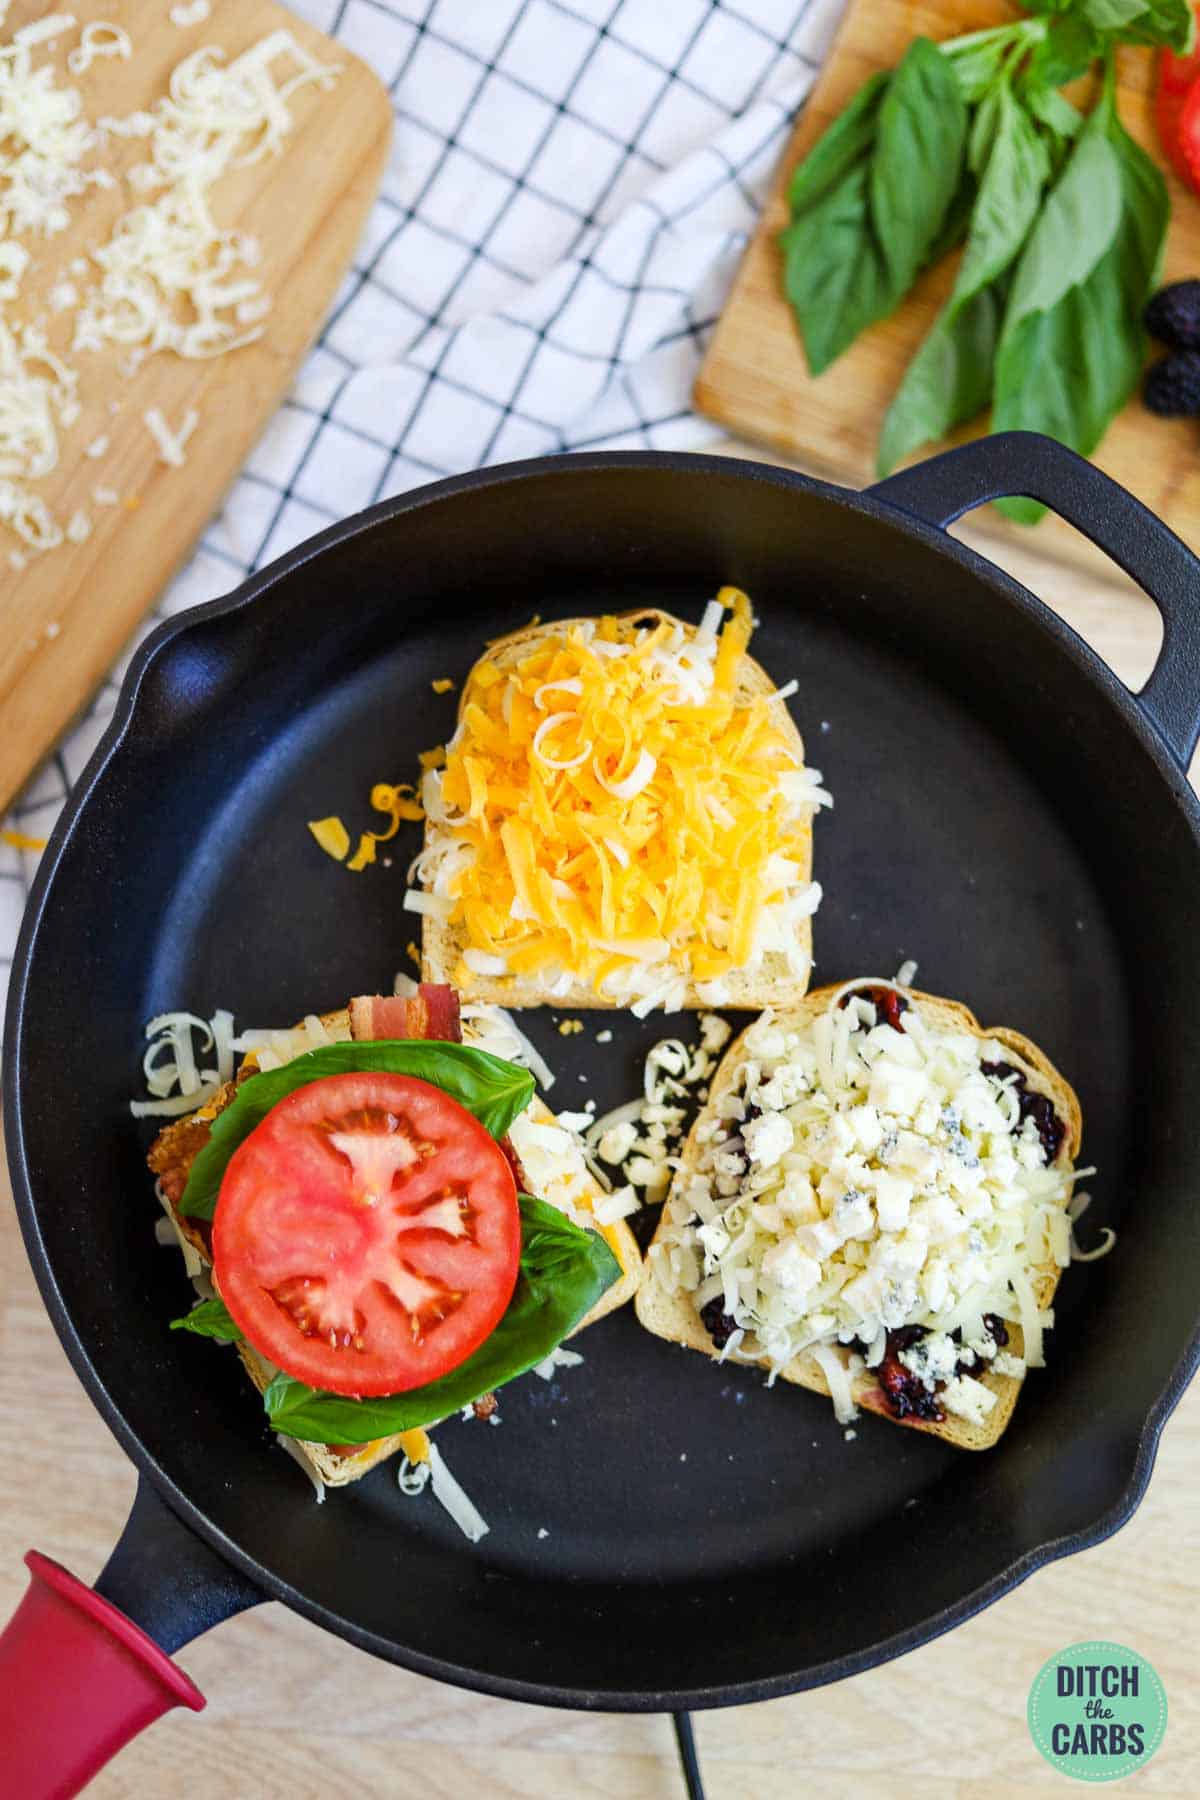 Shredded cheese and toppings layered over 3 pieces of butter keto bread in a cast iron skillet to make grilled cheese sandwiches.